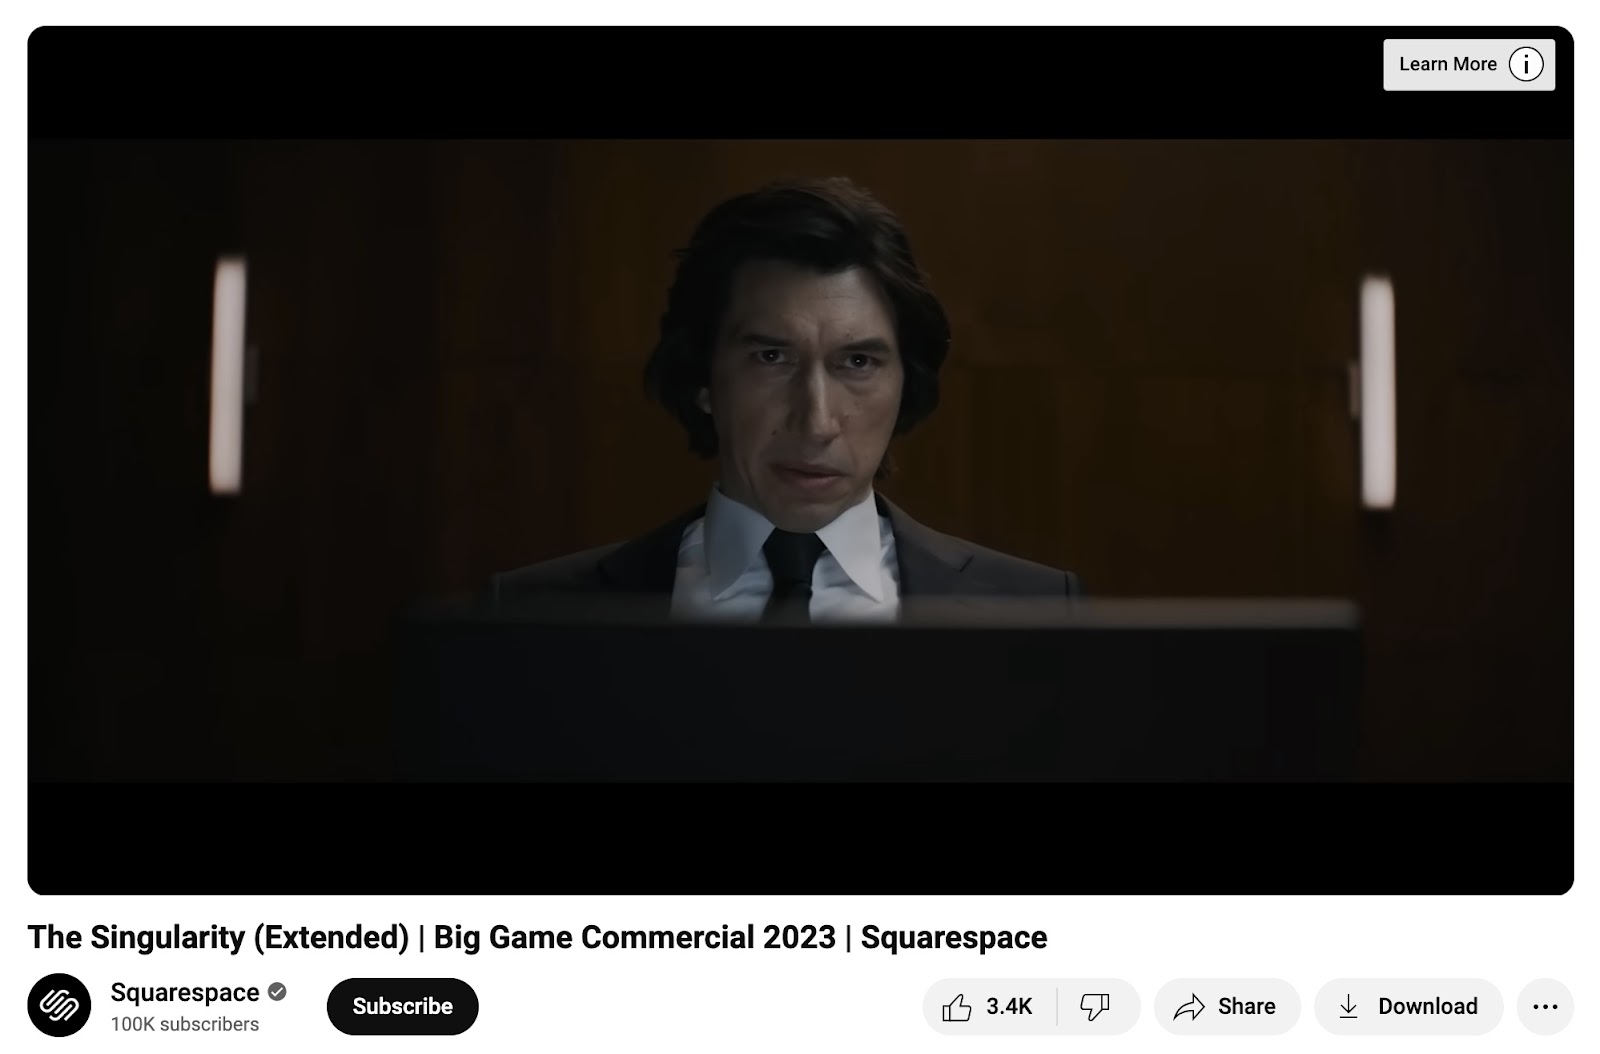 The Squarespace Super Bowl ad from 2023 on Youtube used to boost brand visibility.